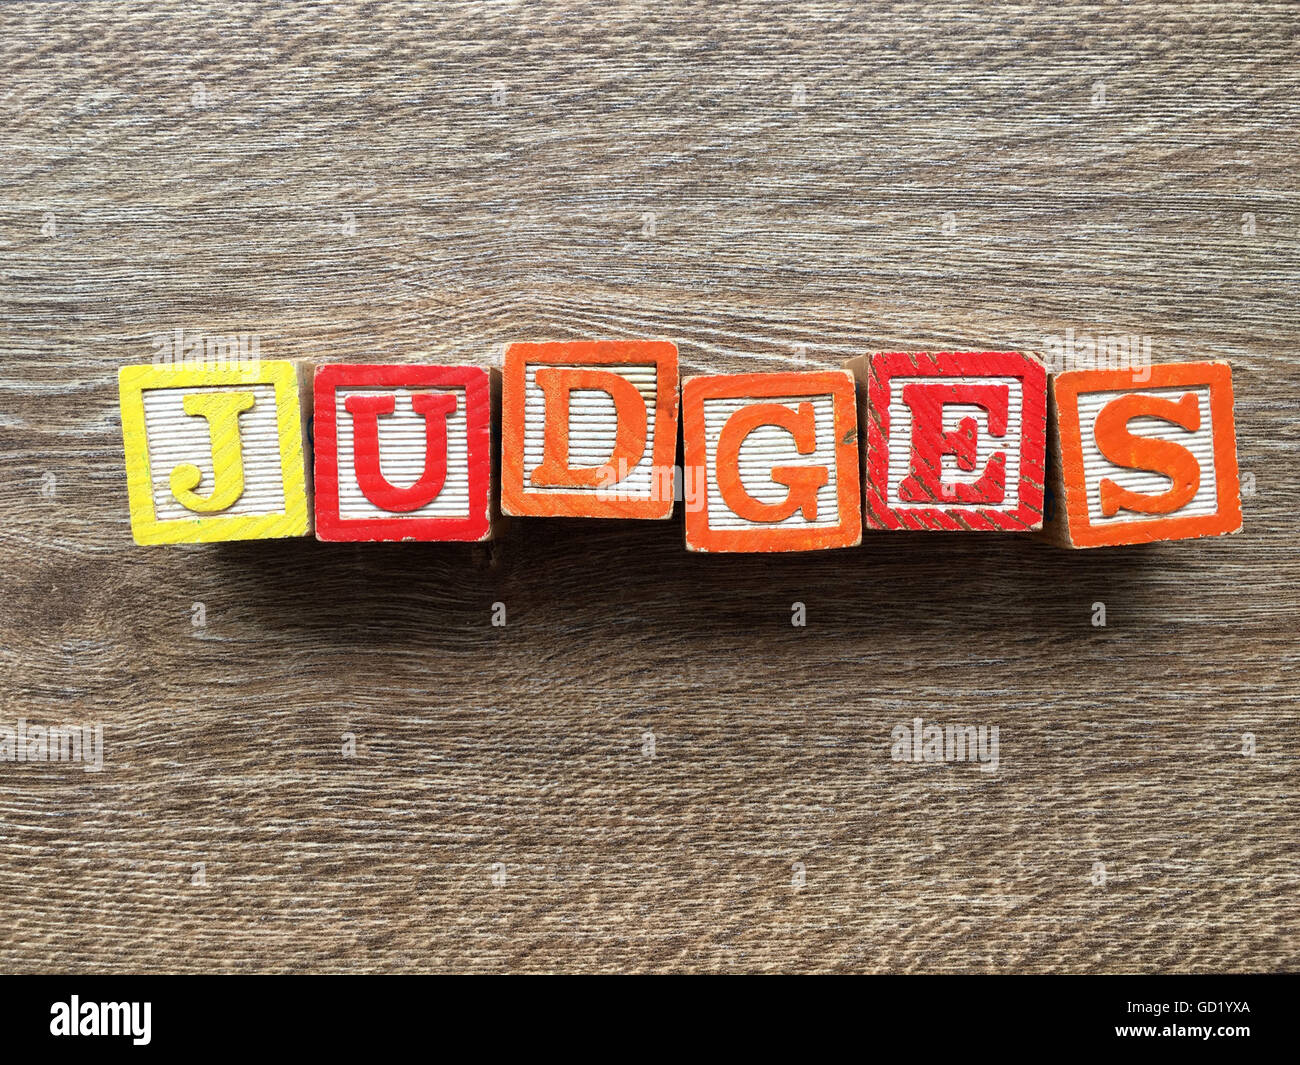 JUDGES word written with wood block letter toys Stock Photo